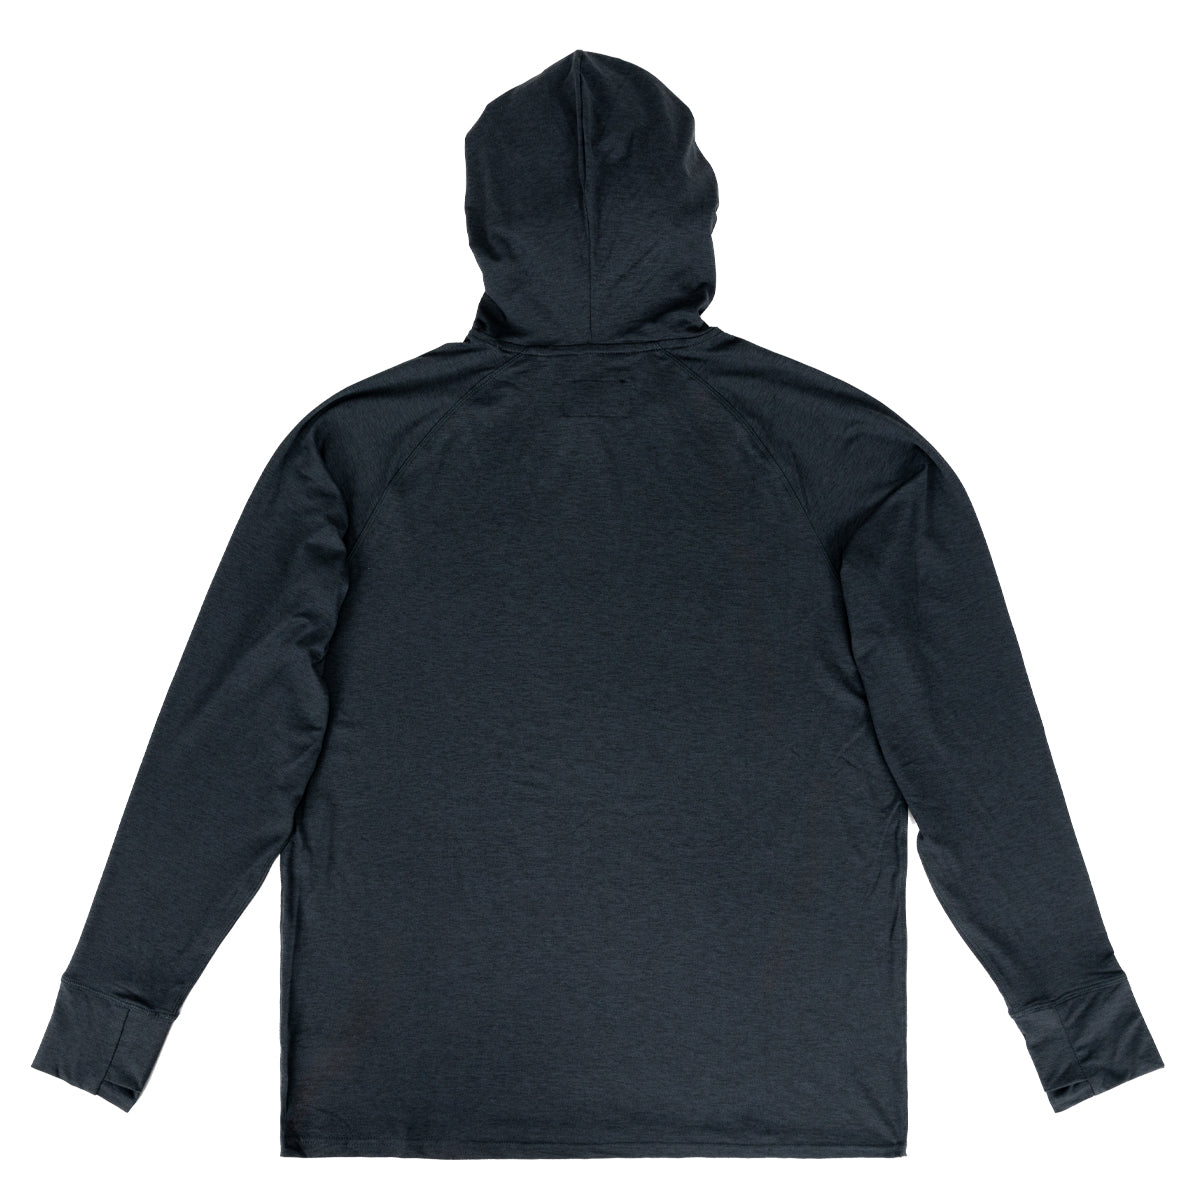 GOHUNT Approach Hoodie | Shop at GOHUNT